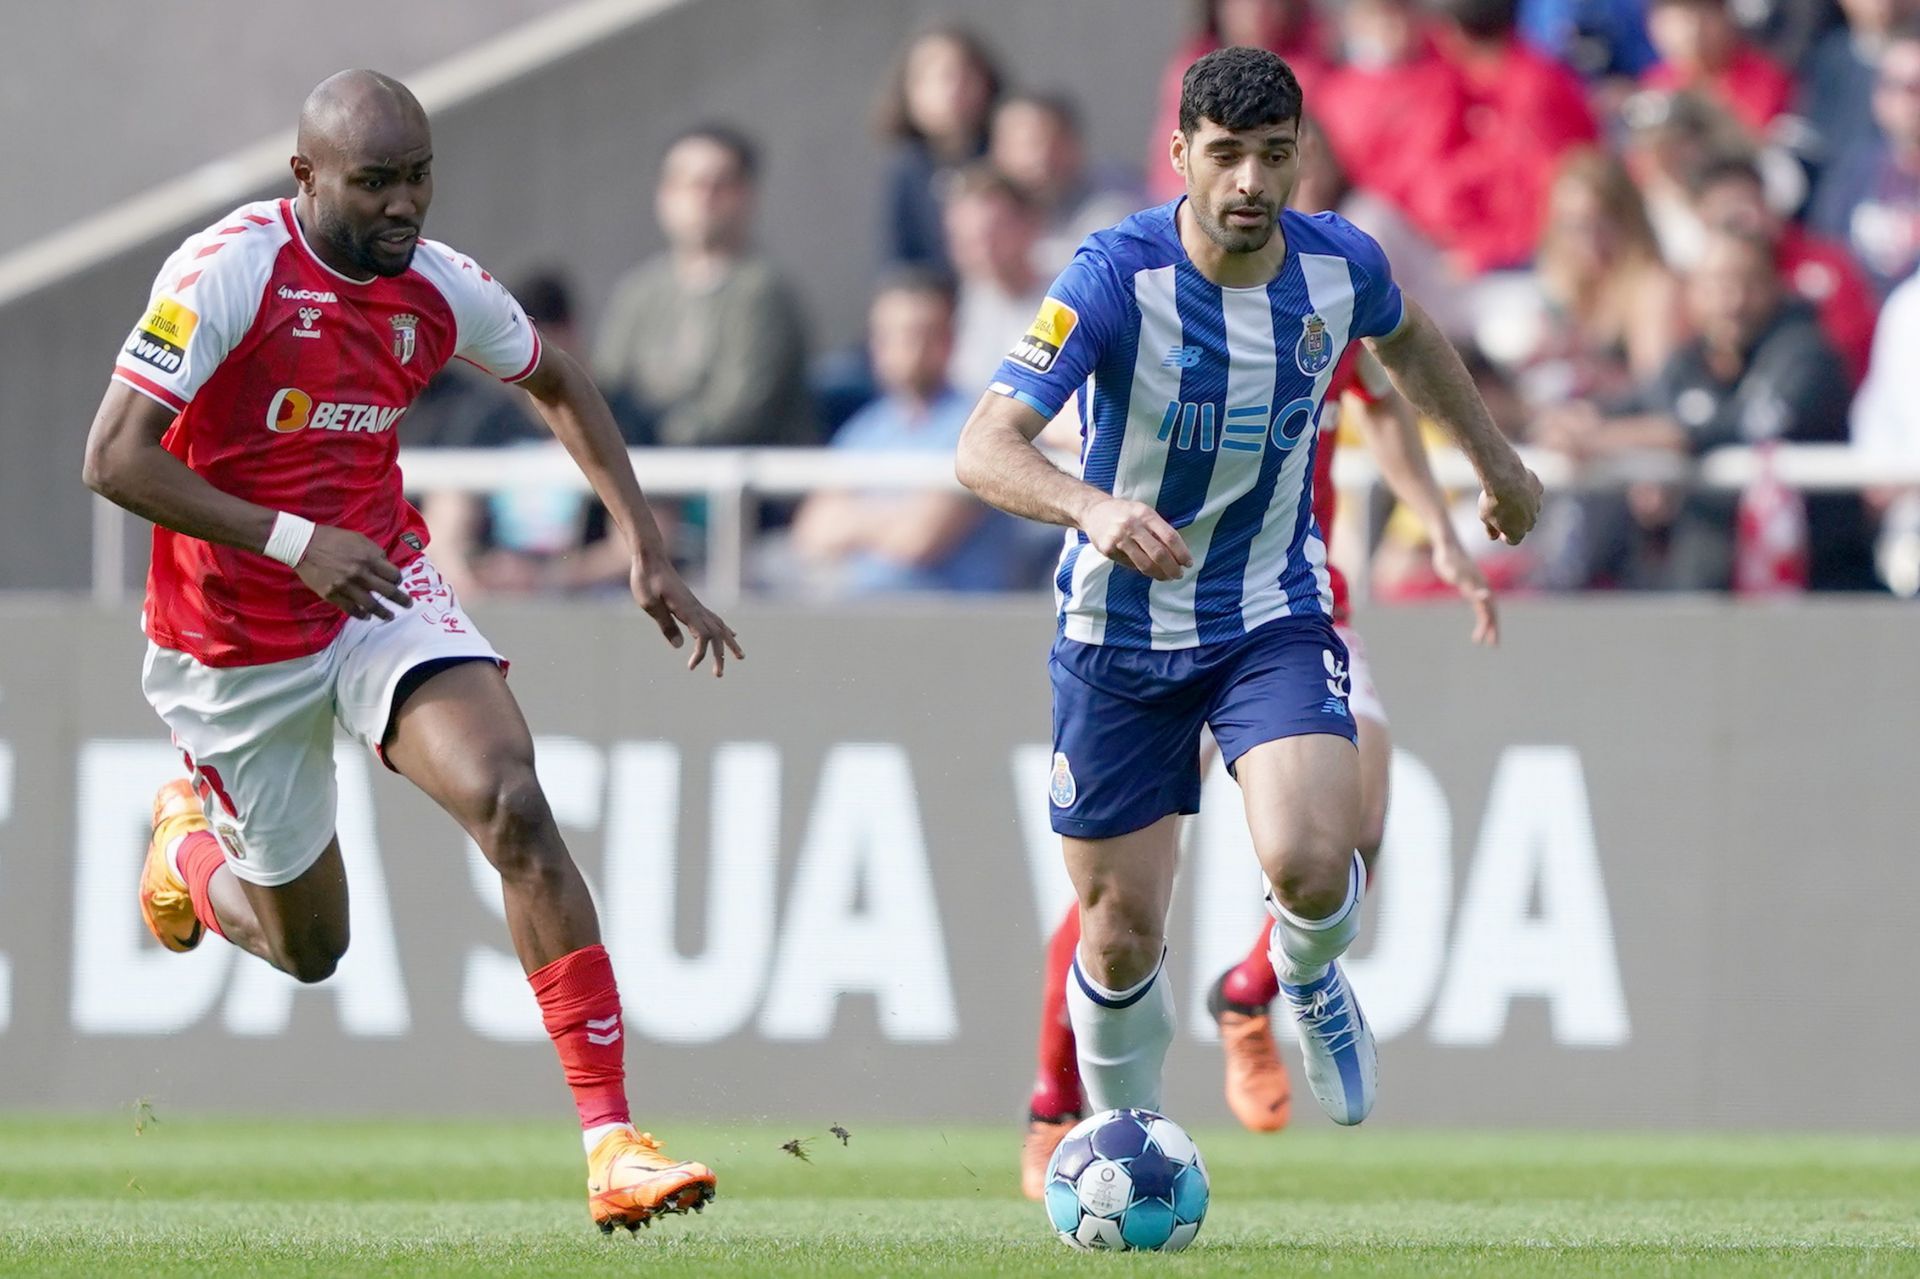 Porto and Braga meet in an exciting top-of-the-table clash in Primeira Liga on Friday